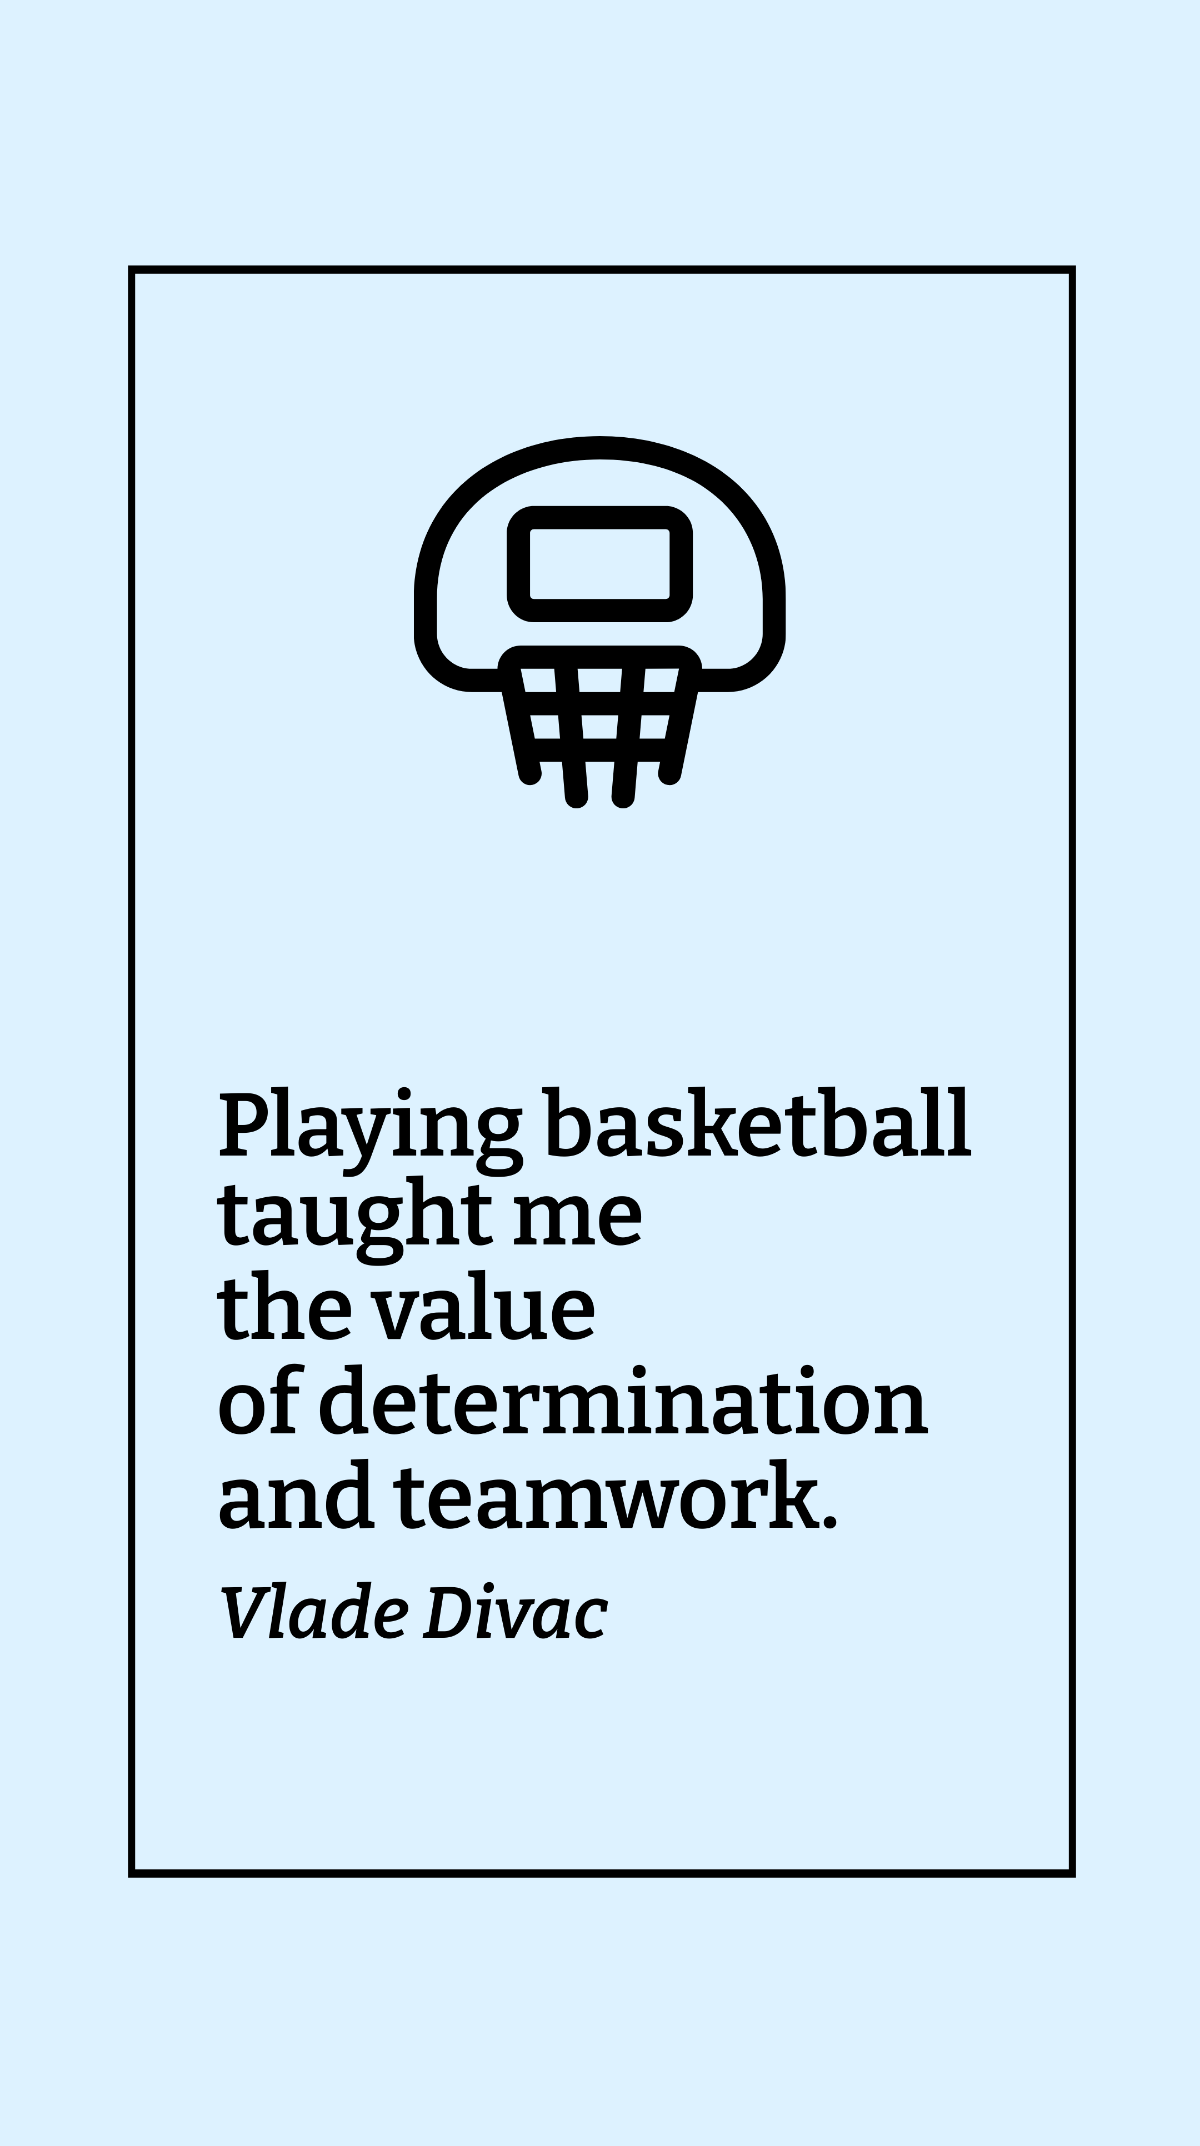 Free Vlade Divac - Playing basketball taught me the value of determination and teamwork. Template